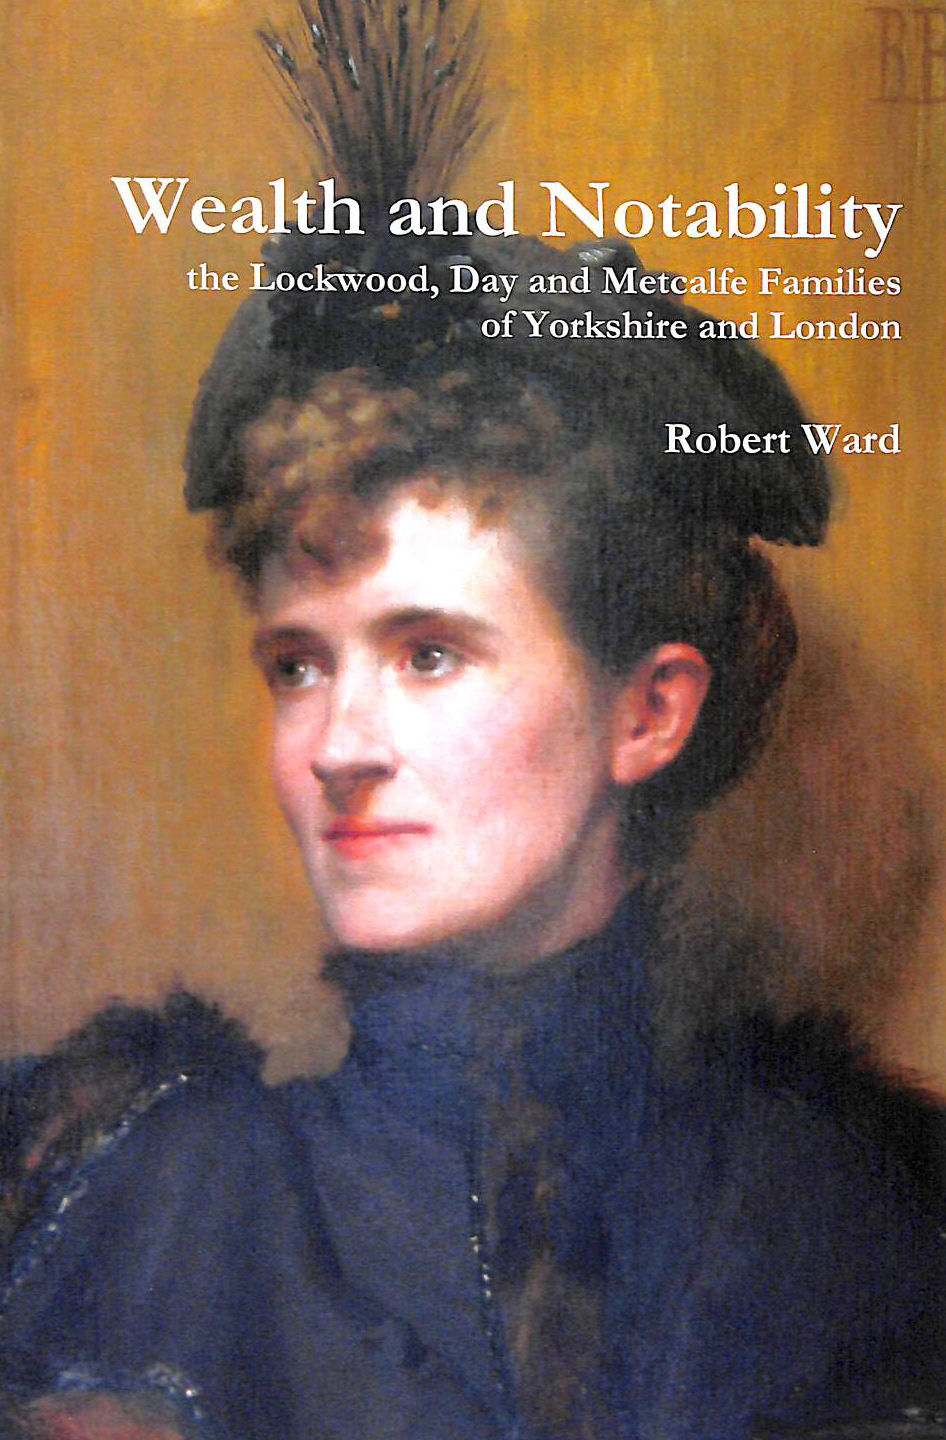 ROBERT WARD - Wealth and Notability: the Lockwood, Day and Metcalfe Families of Yorkshire and London